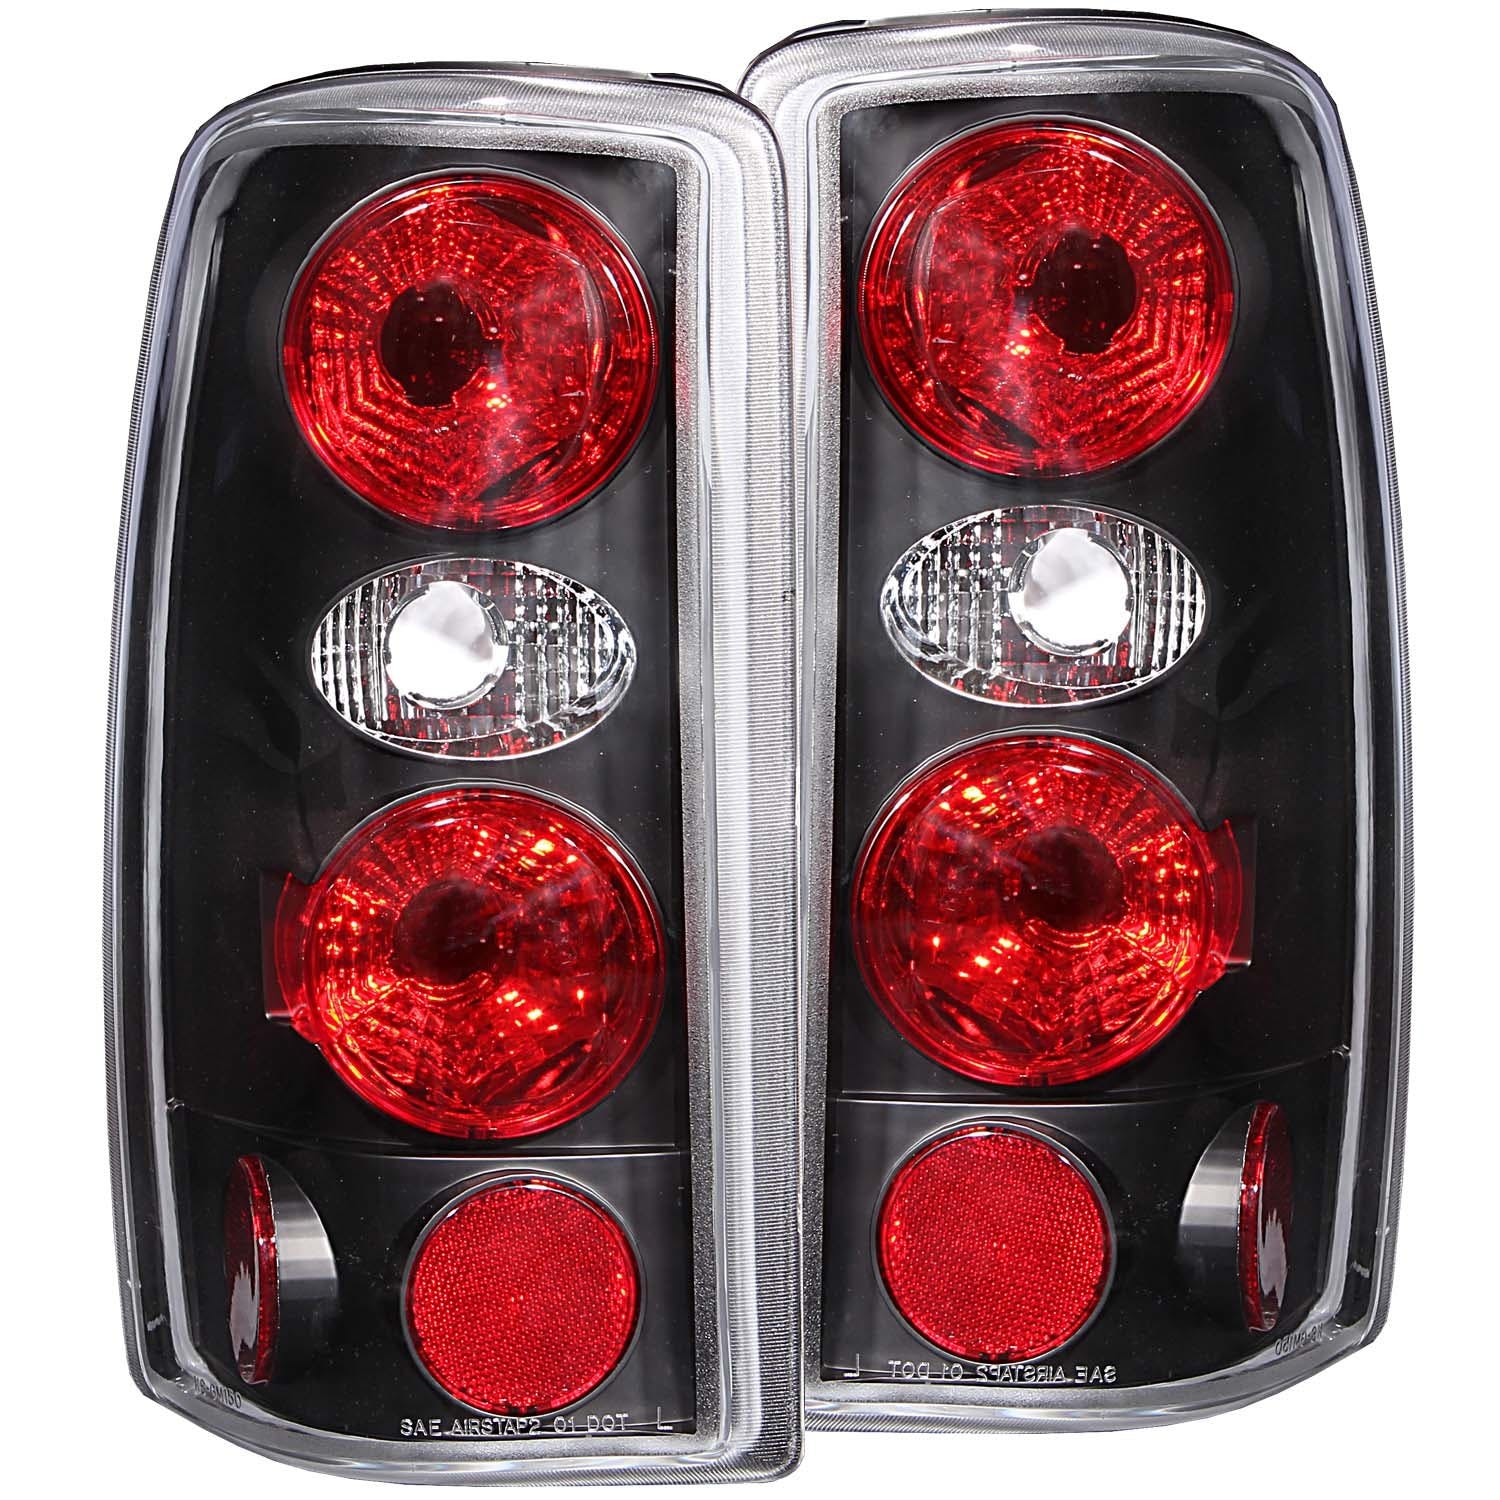 AnzoUSA 211010 Taillights Black